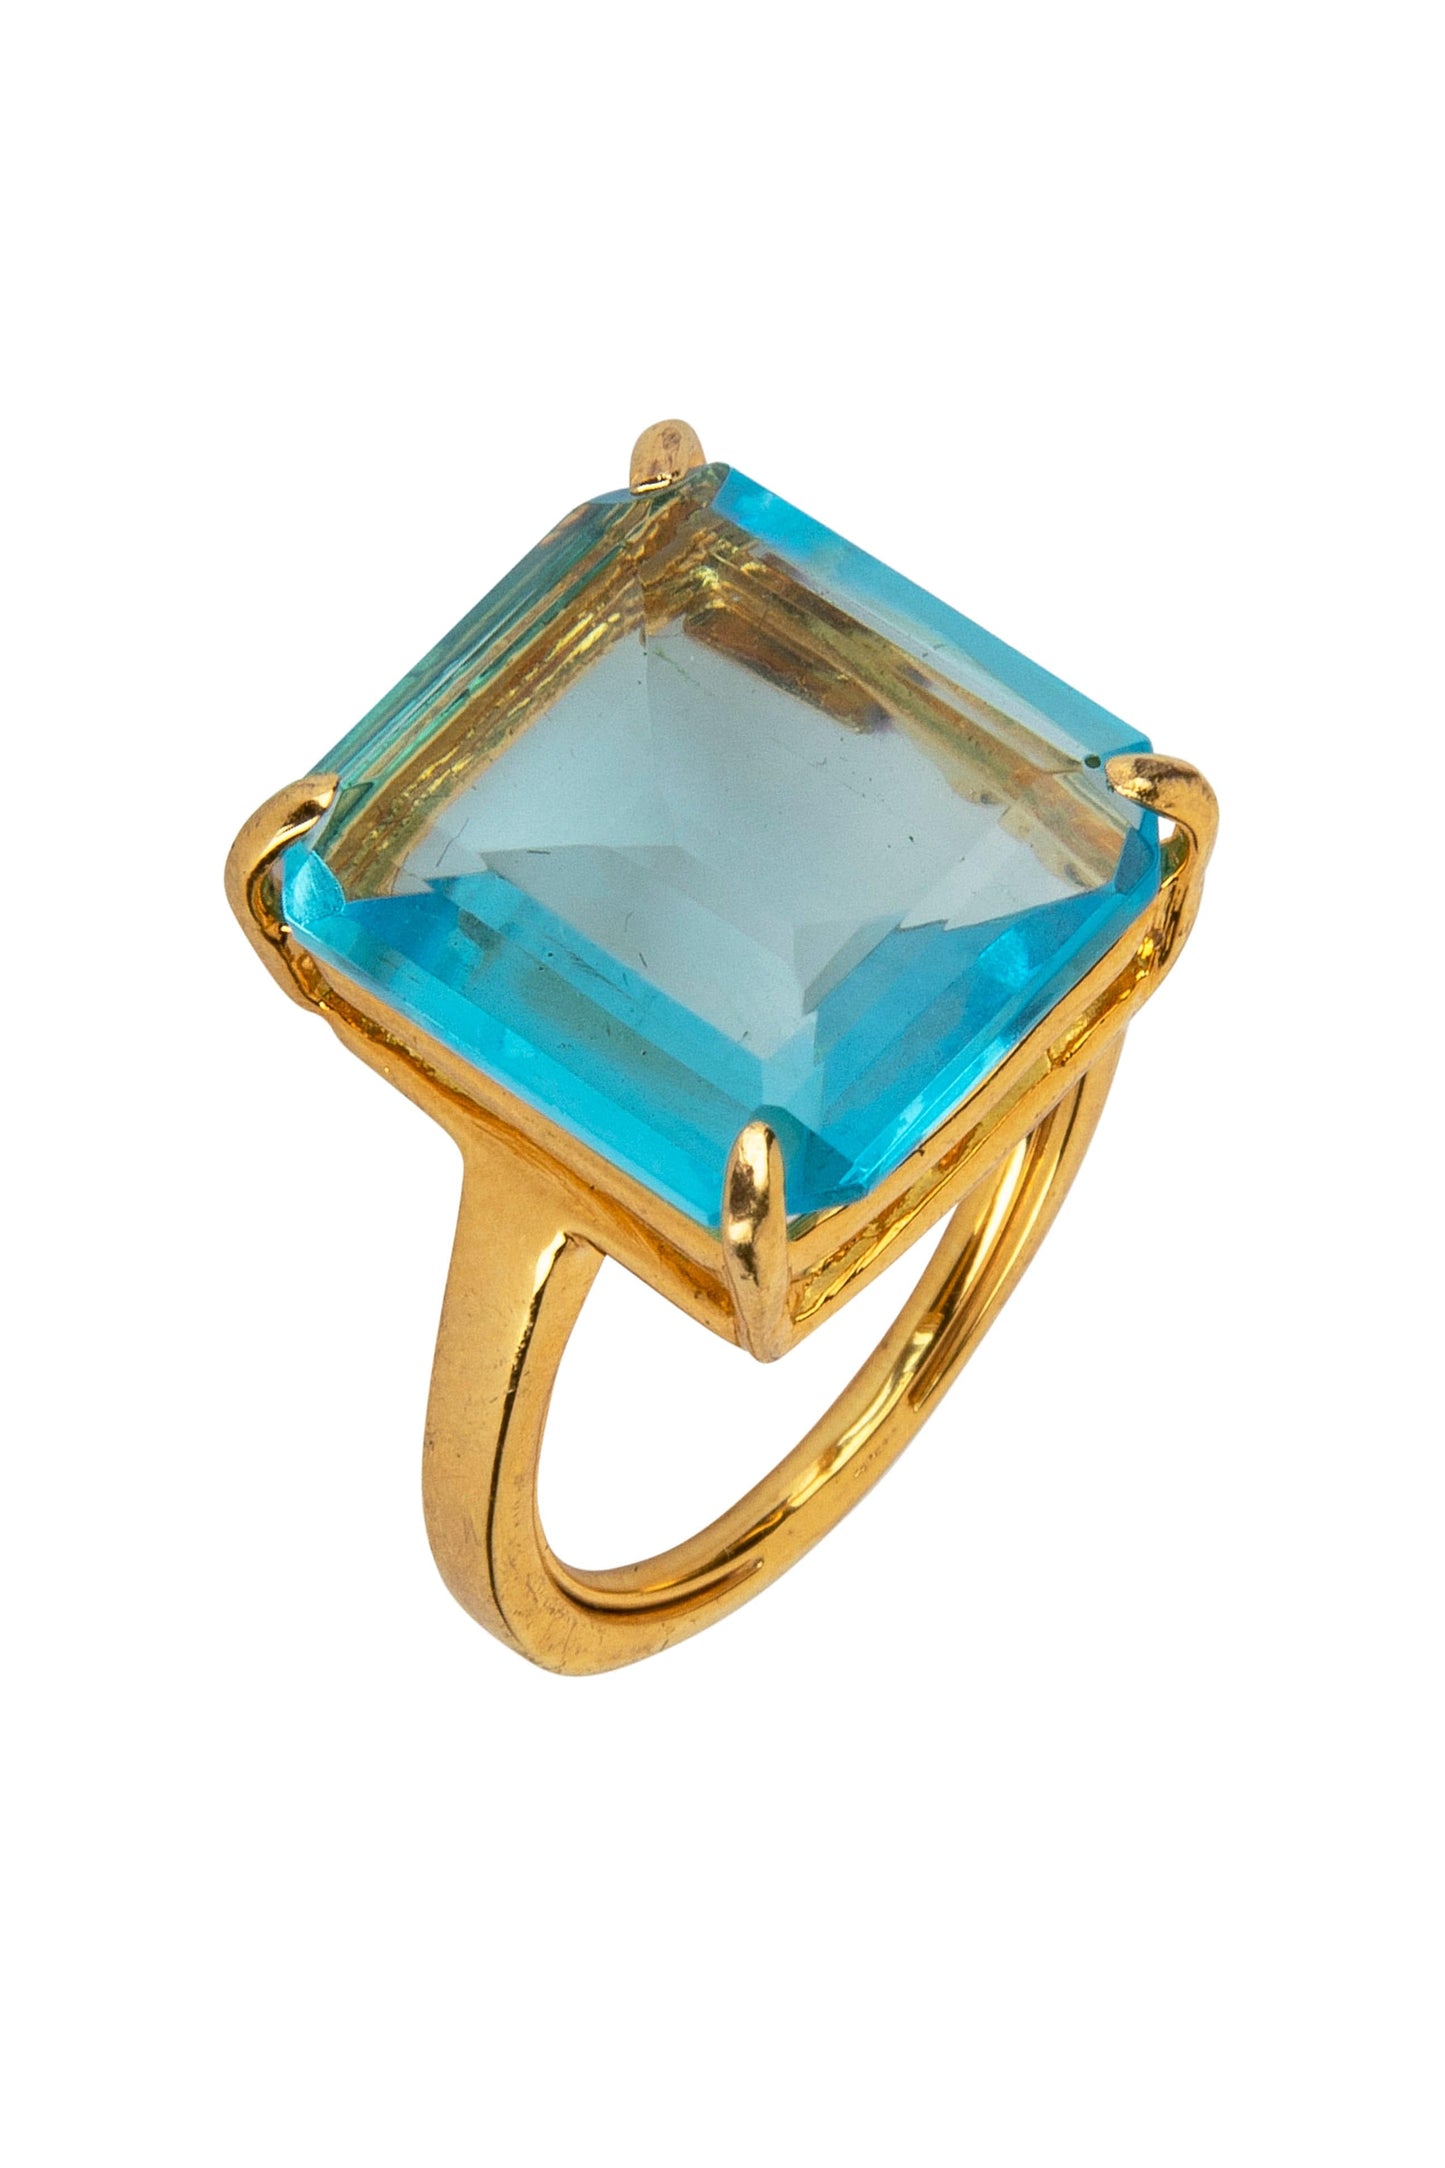 Emerald Cut Blue Topaz Ring JEWELRYBOUTIQUERING BOUNKIT JEWELRY   